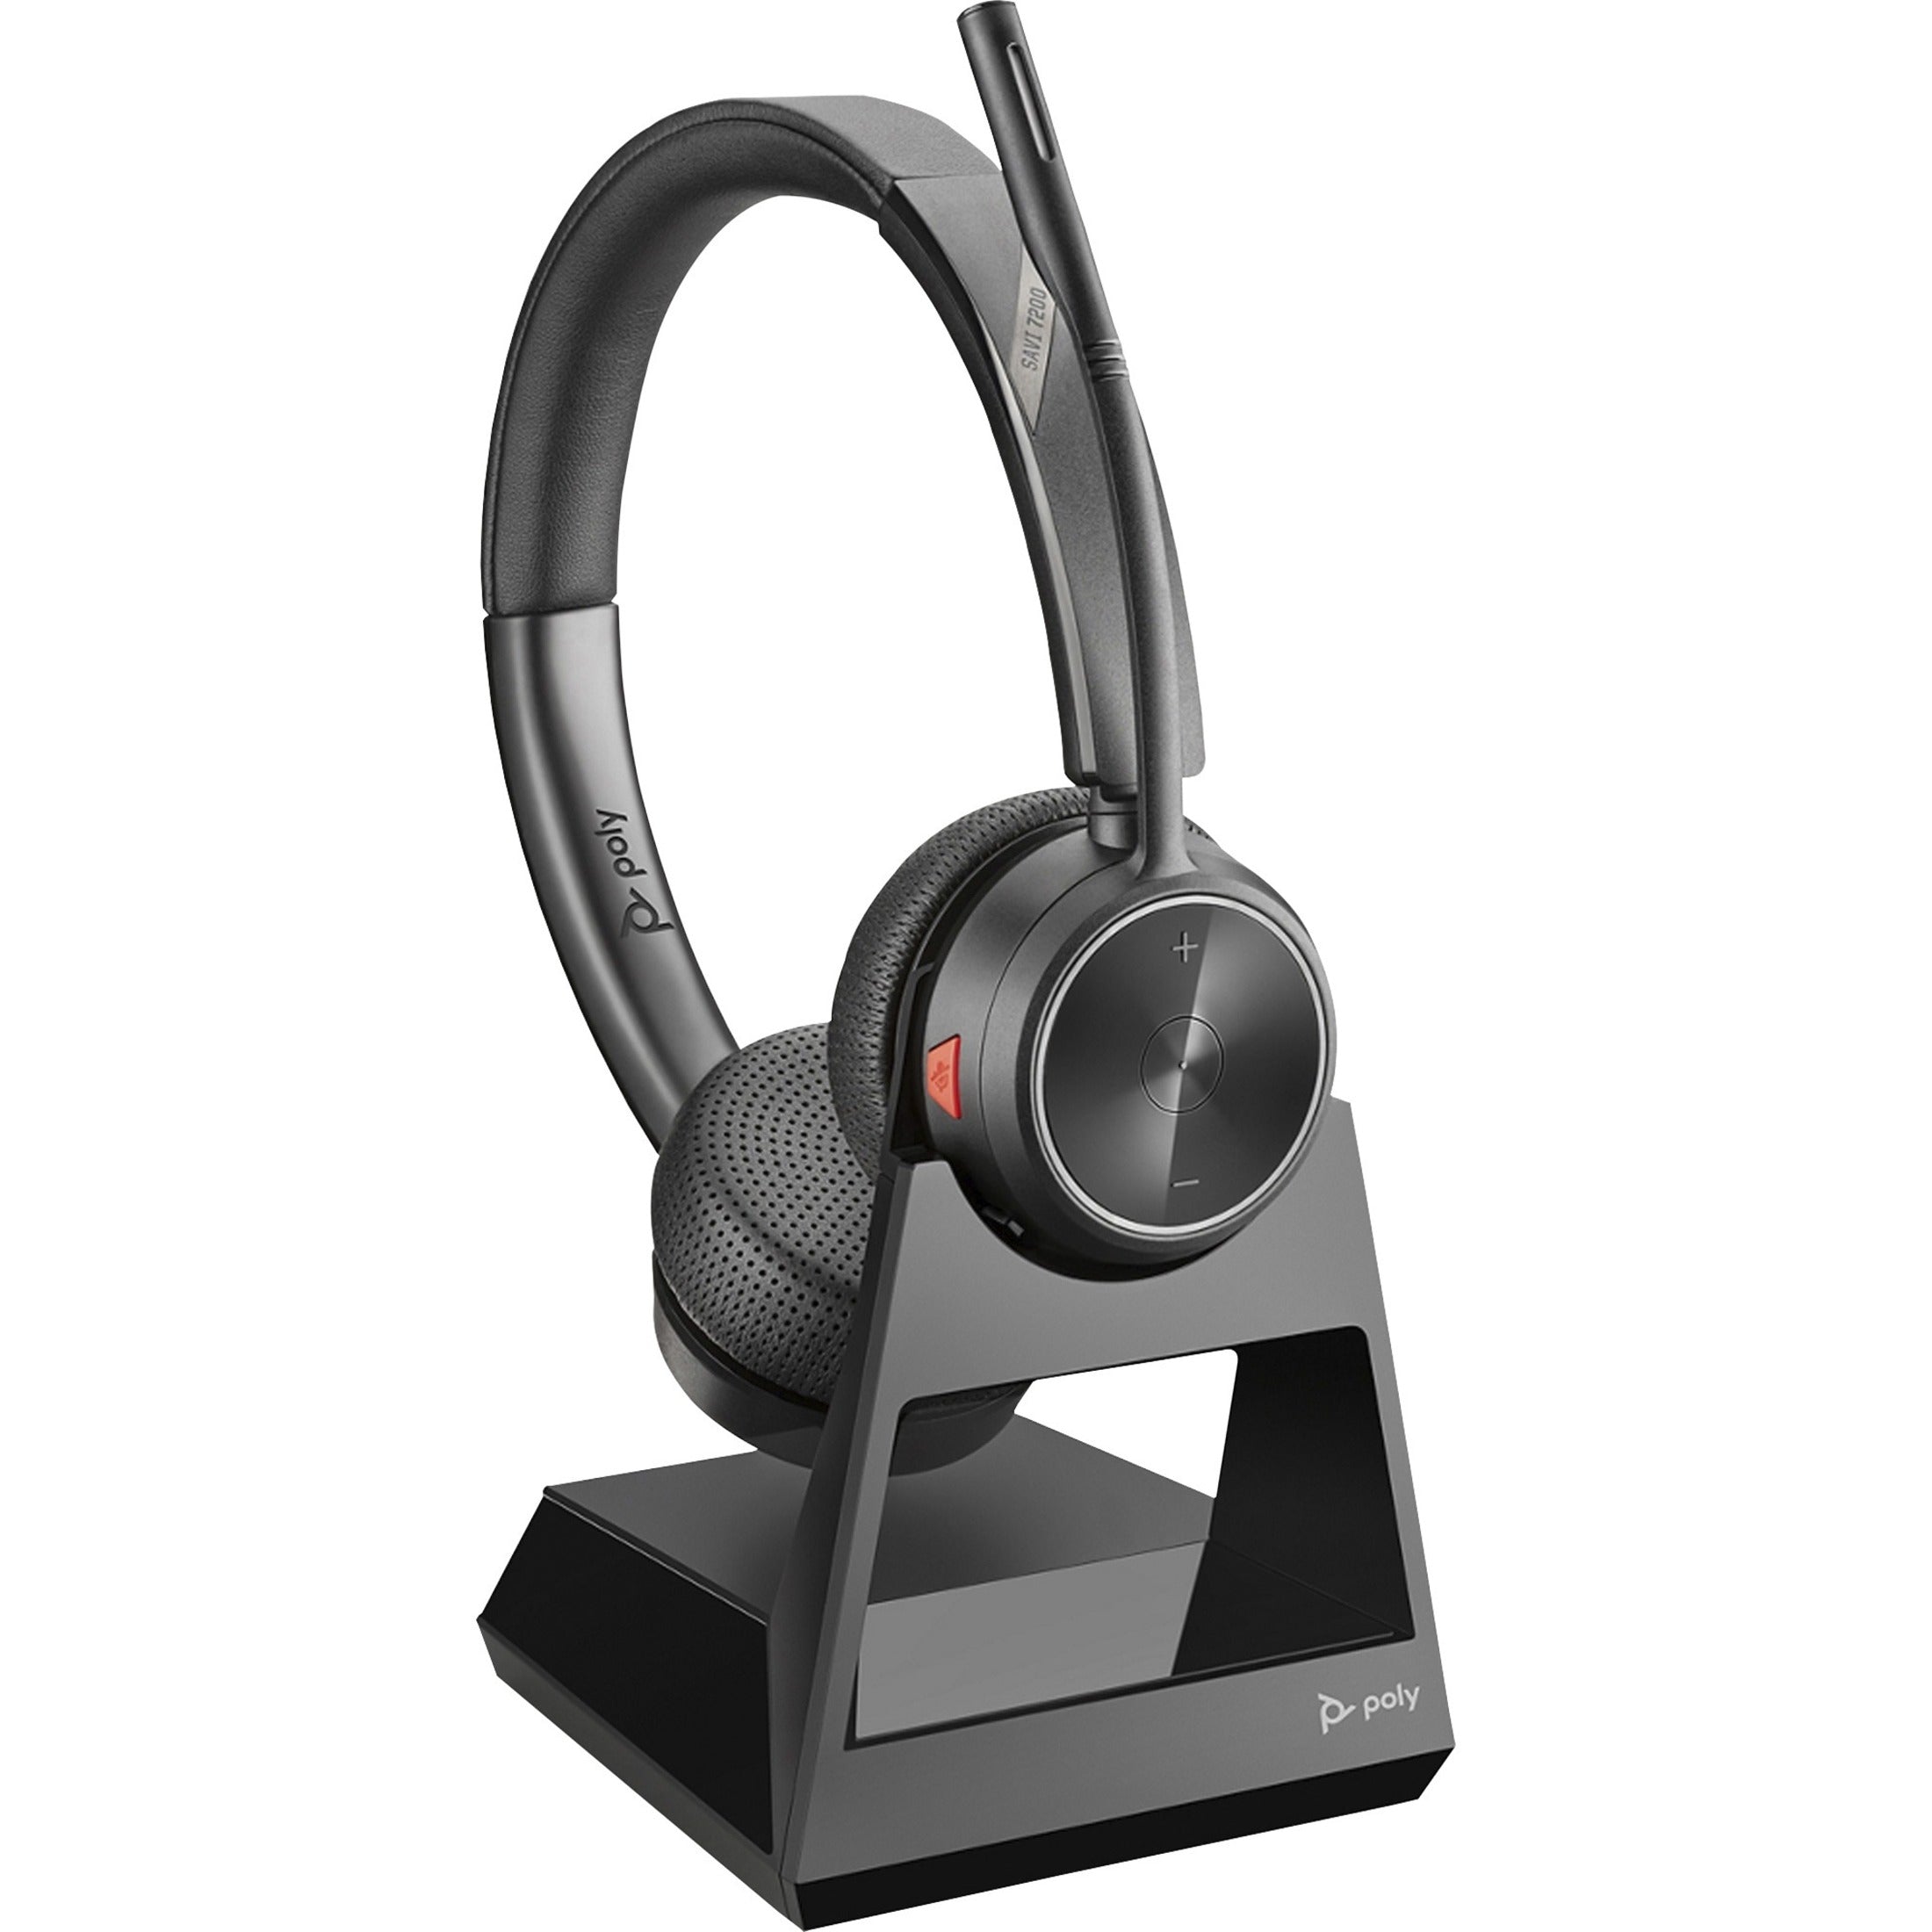 Plantronics 213020-01 SAVI 7220 D,OTH,DECT 6.0,NA Wireless Headset, Stereo Sound, Noise Cancelling Microphone